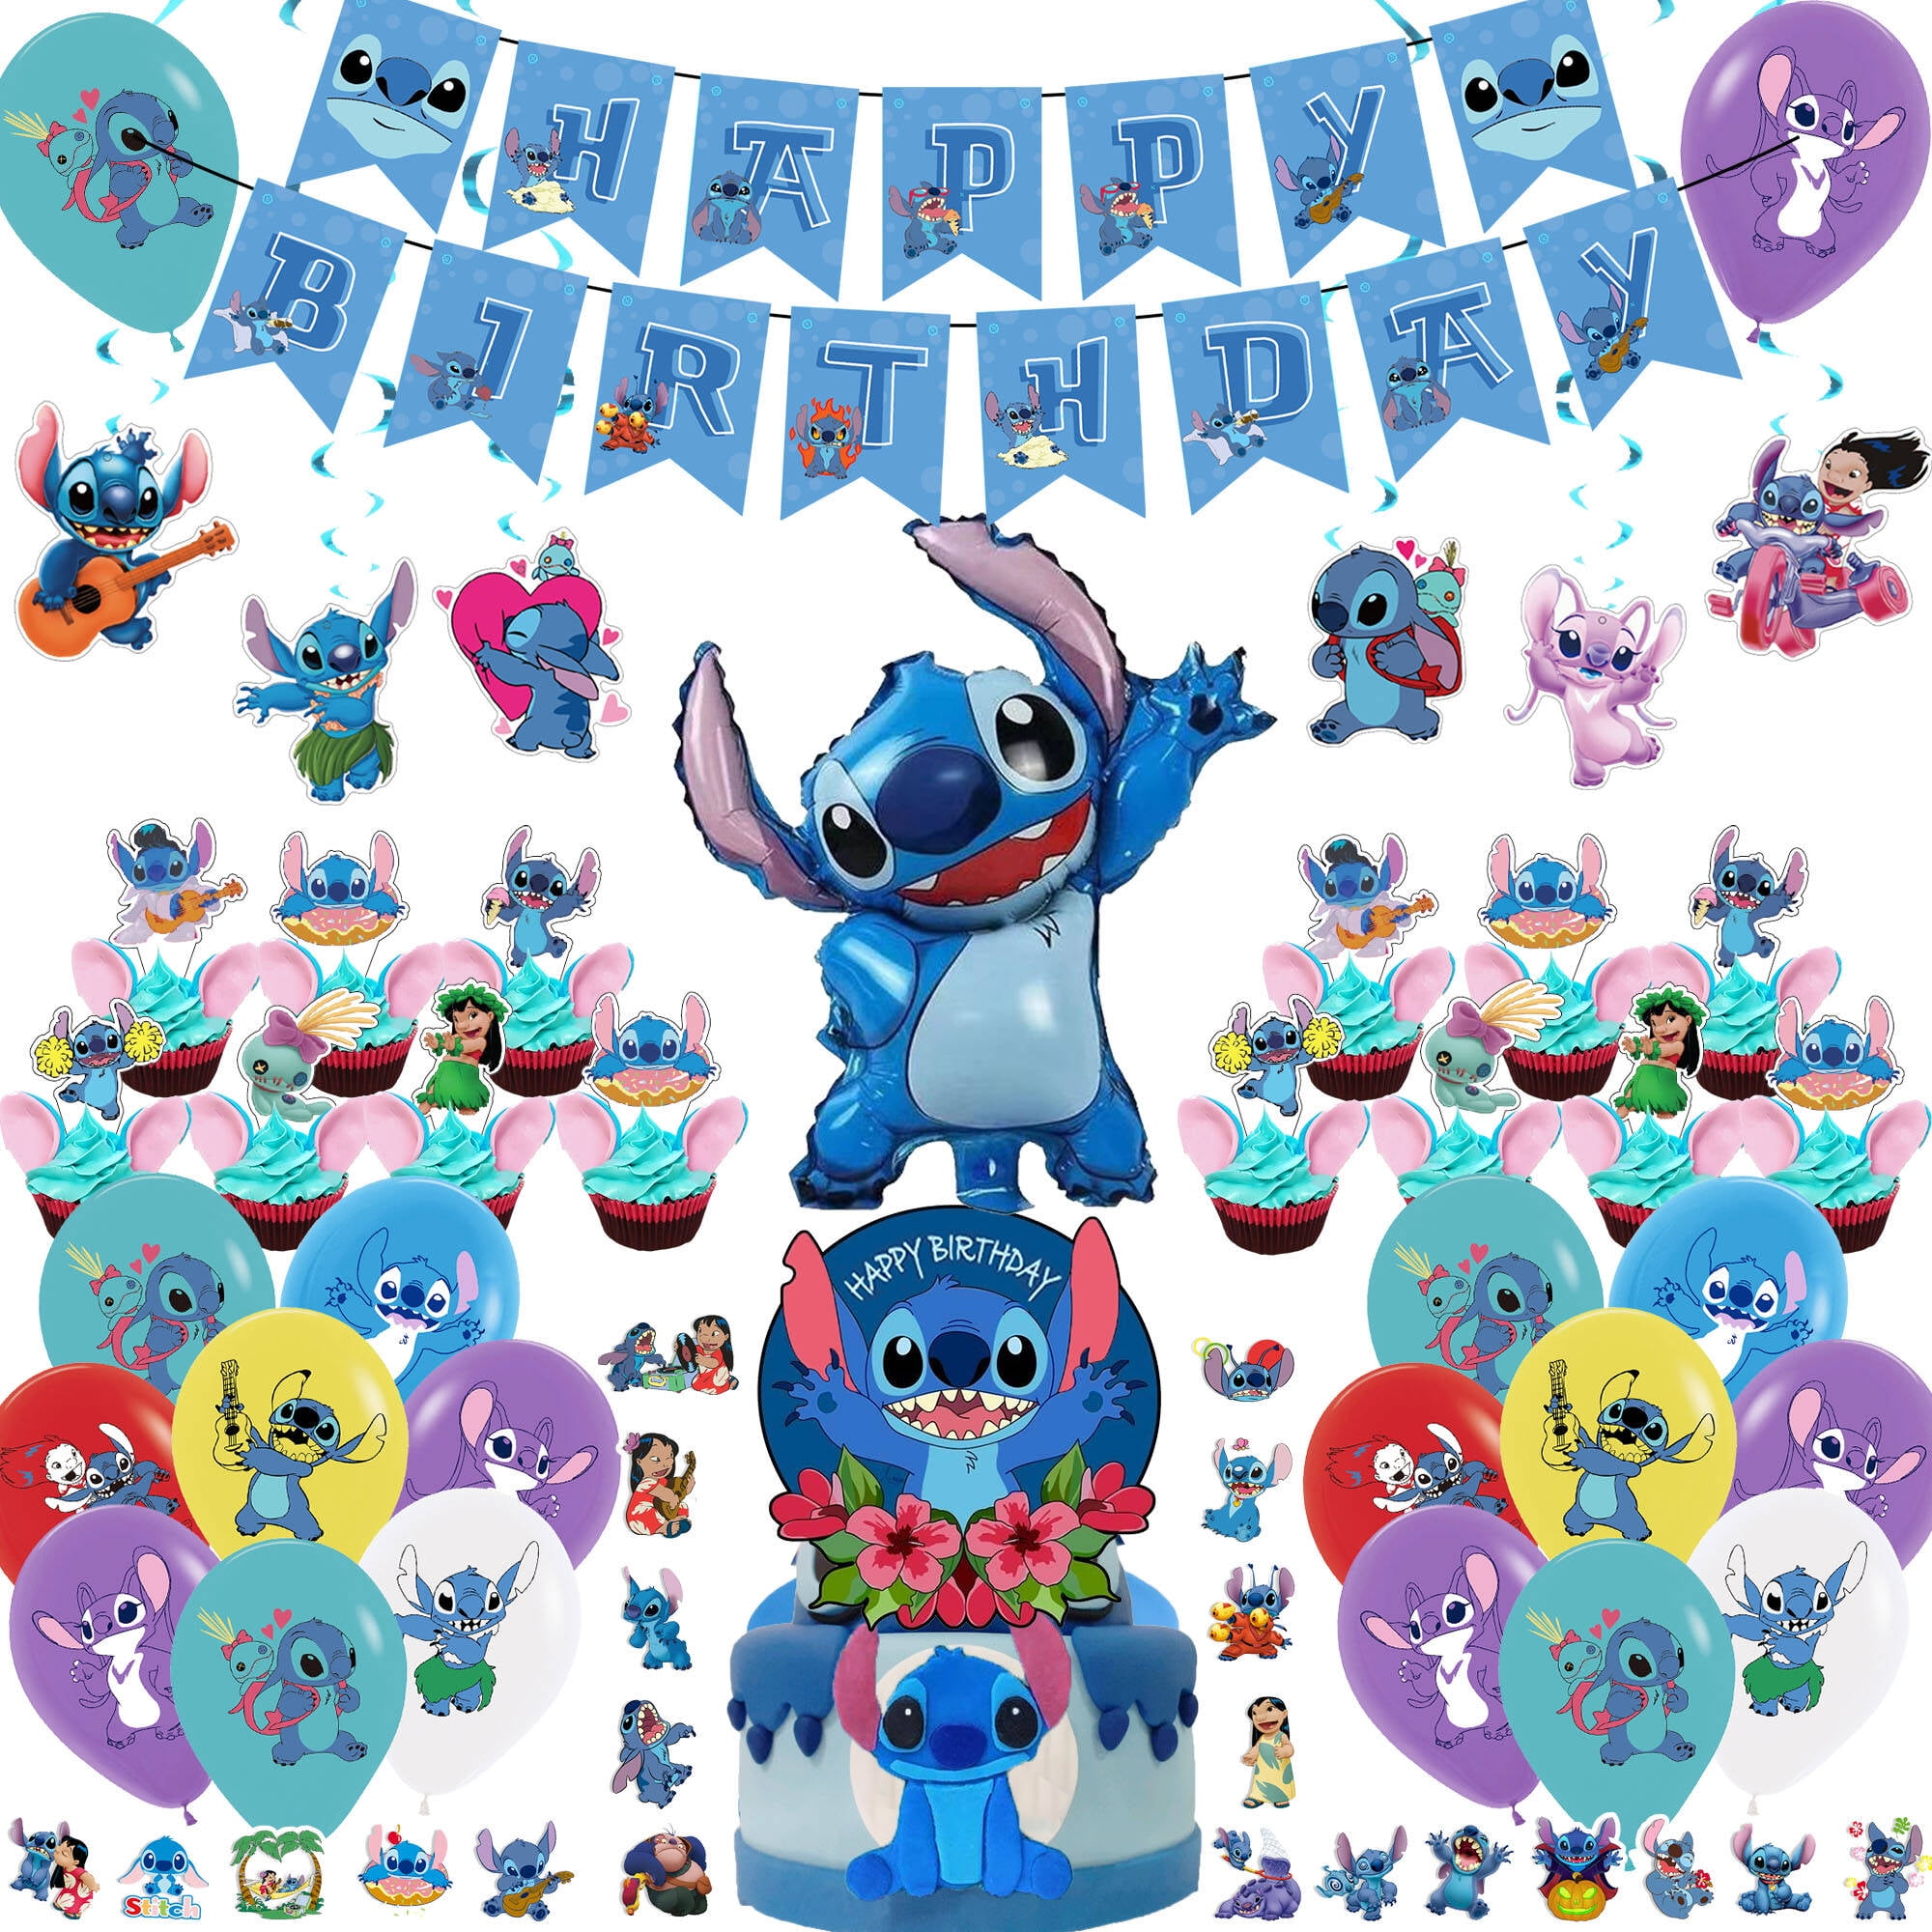 Lilo and Stitch Party Supplies, 101pcs Birthday Decorations Set Include Banner, Balloons, Stickers, Hanging Swirls, Cake Cupcake Toppers, Tablecloth